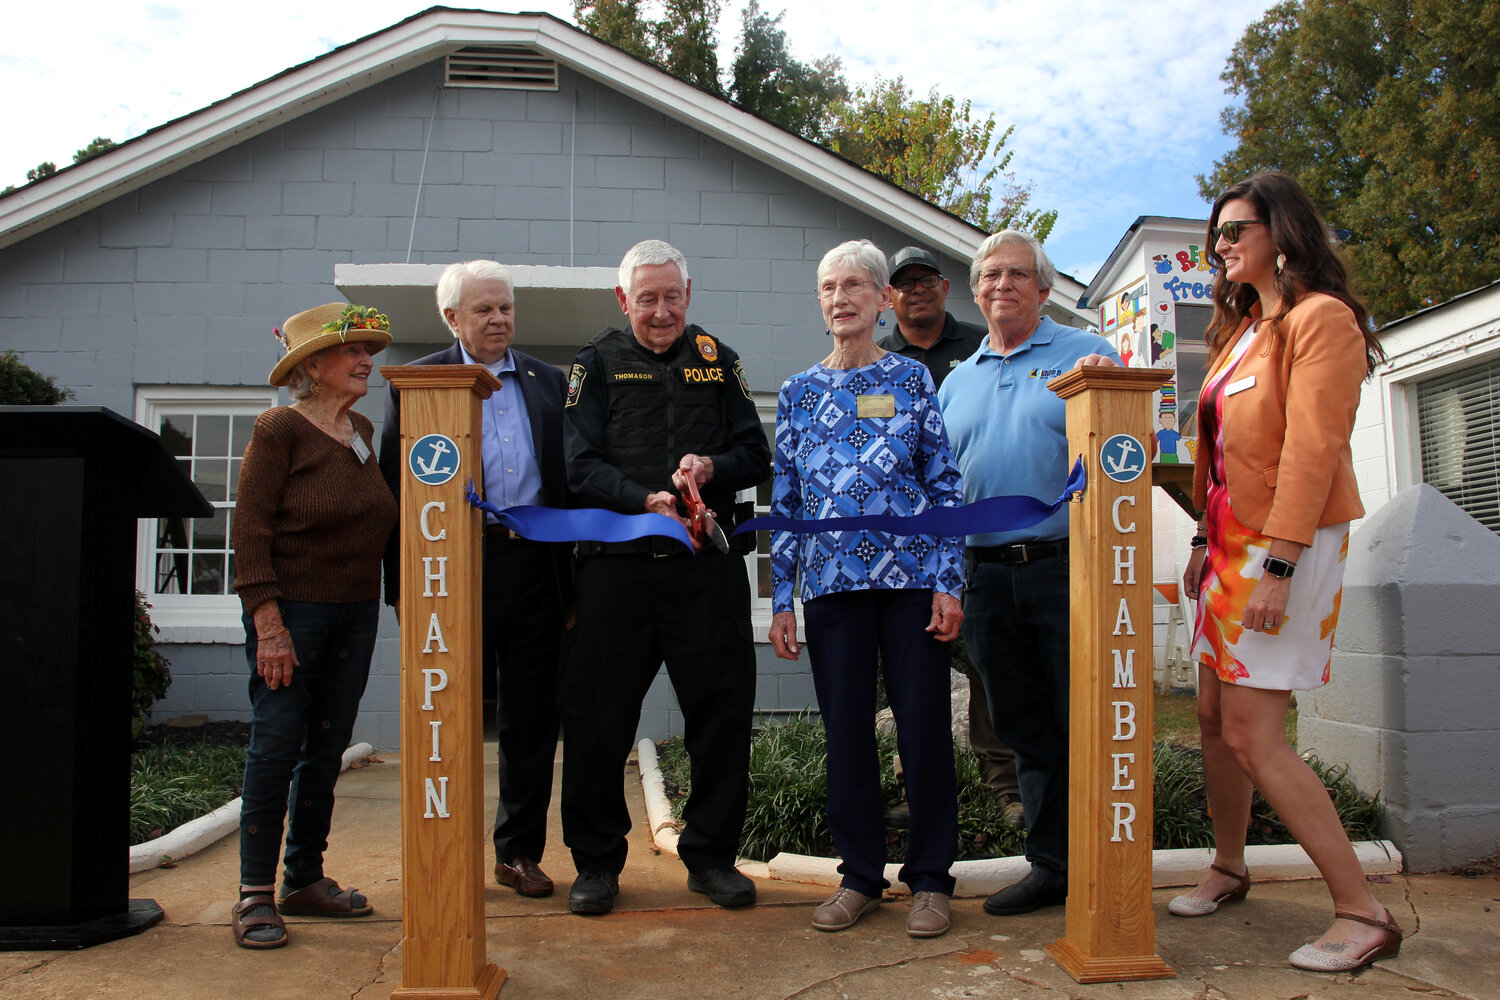 Officials, including Mayor Al Koon (second from left), Chapin Historical Association Secretary and Historian Pat Lewandowsky (middle) and Town Administrator Nichole Burroughs (right), cut the ribbon at the unveiling of Chapin's newly renovated original town hall